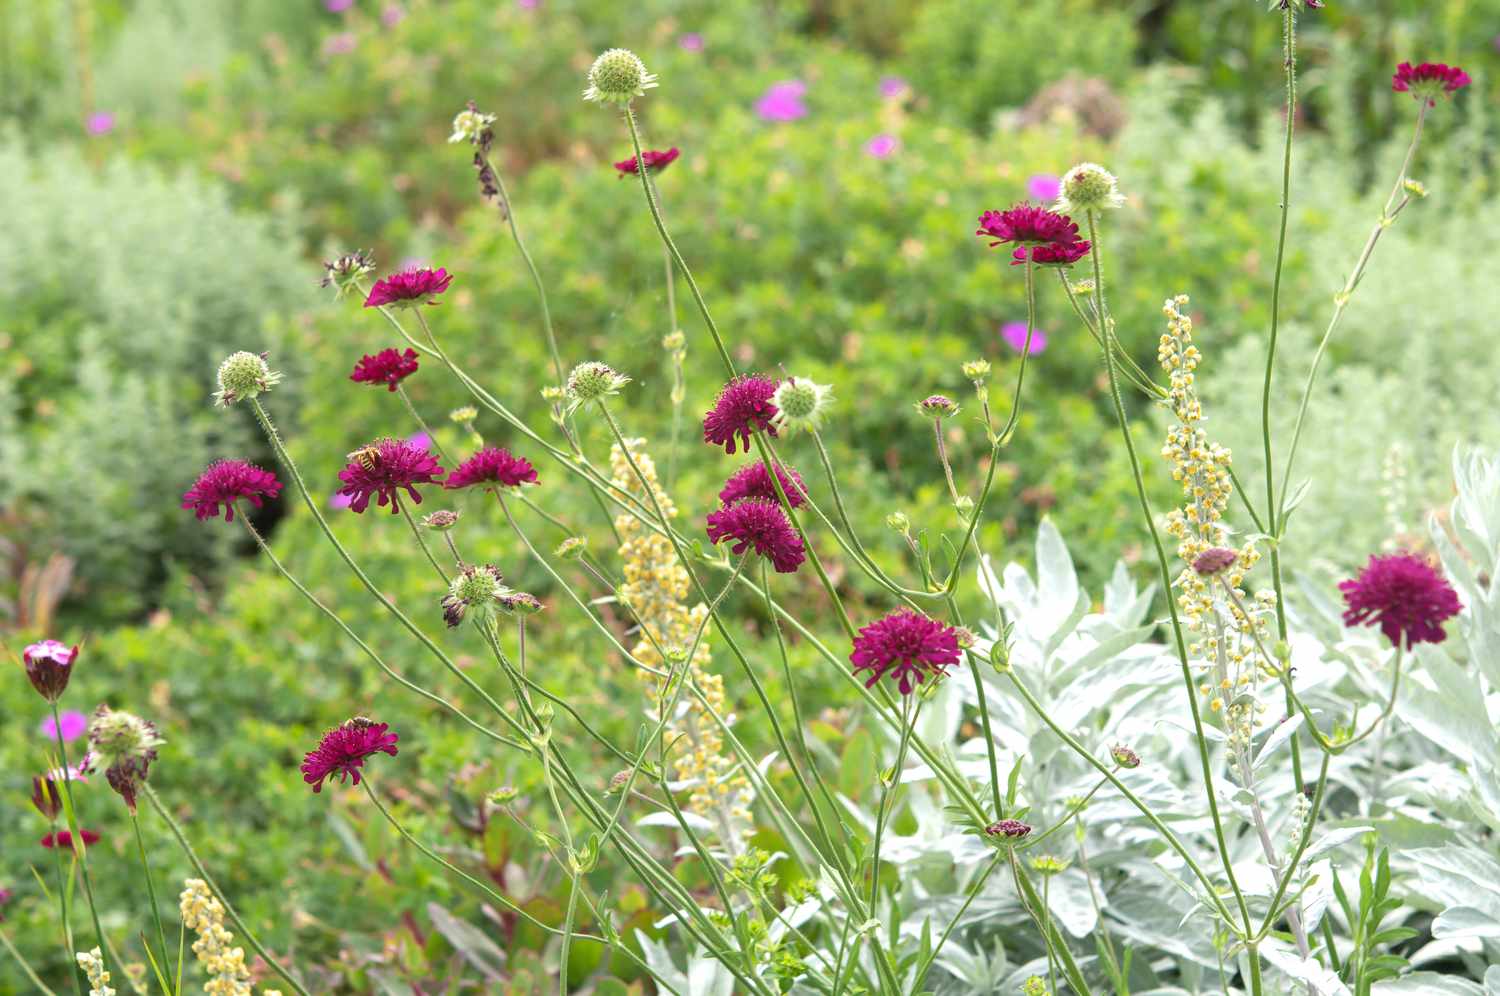 Knautia plant blooming with magenta flowers in garden